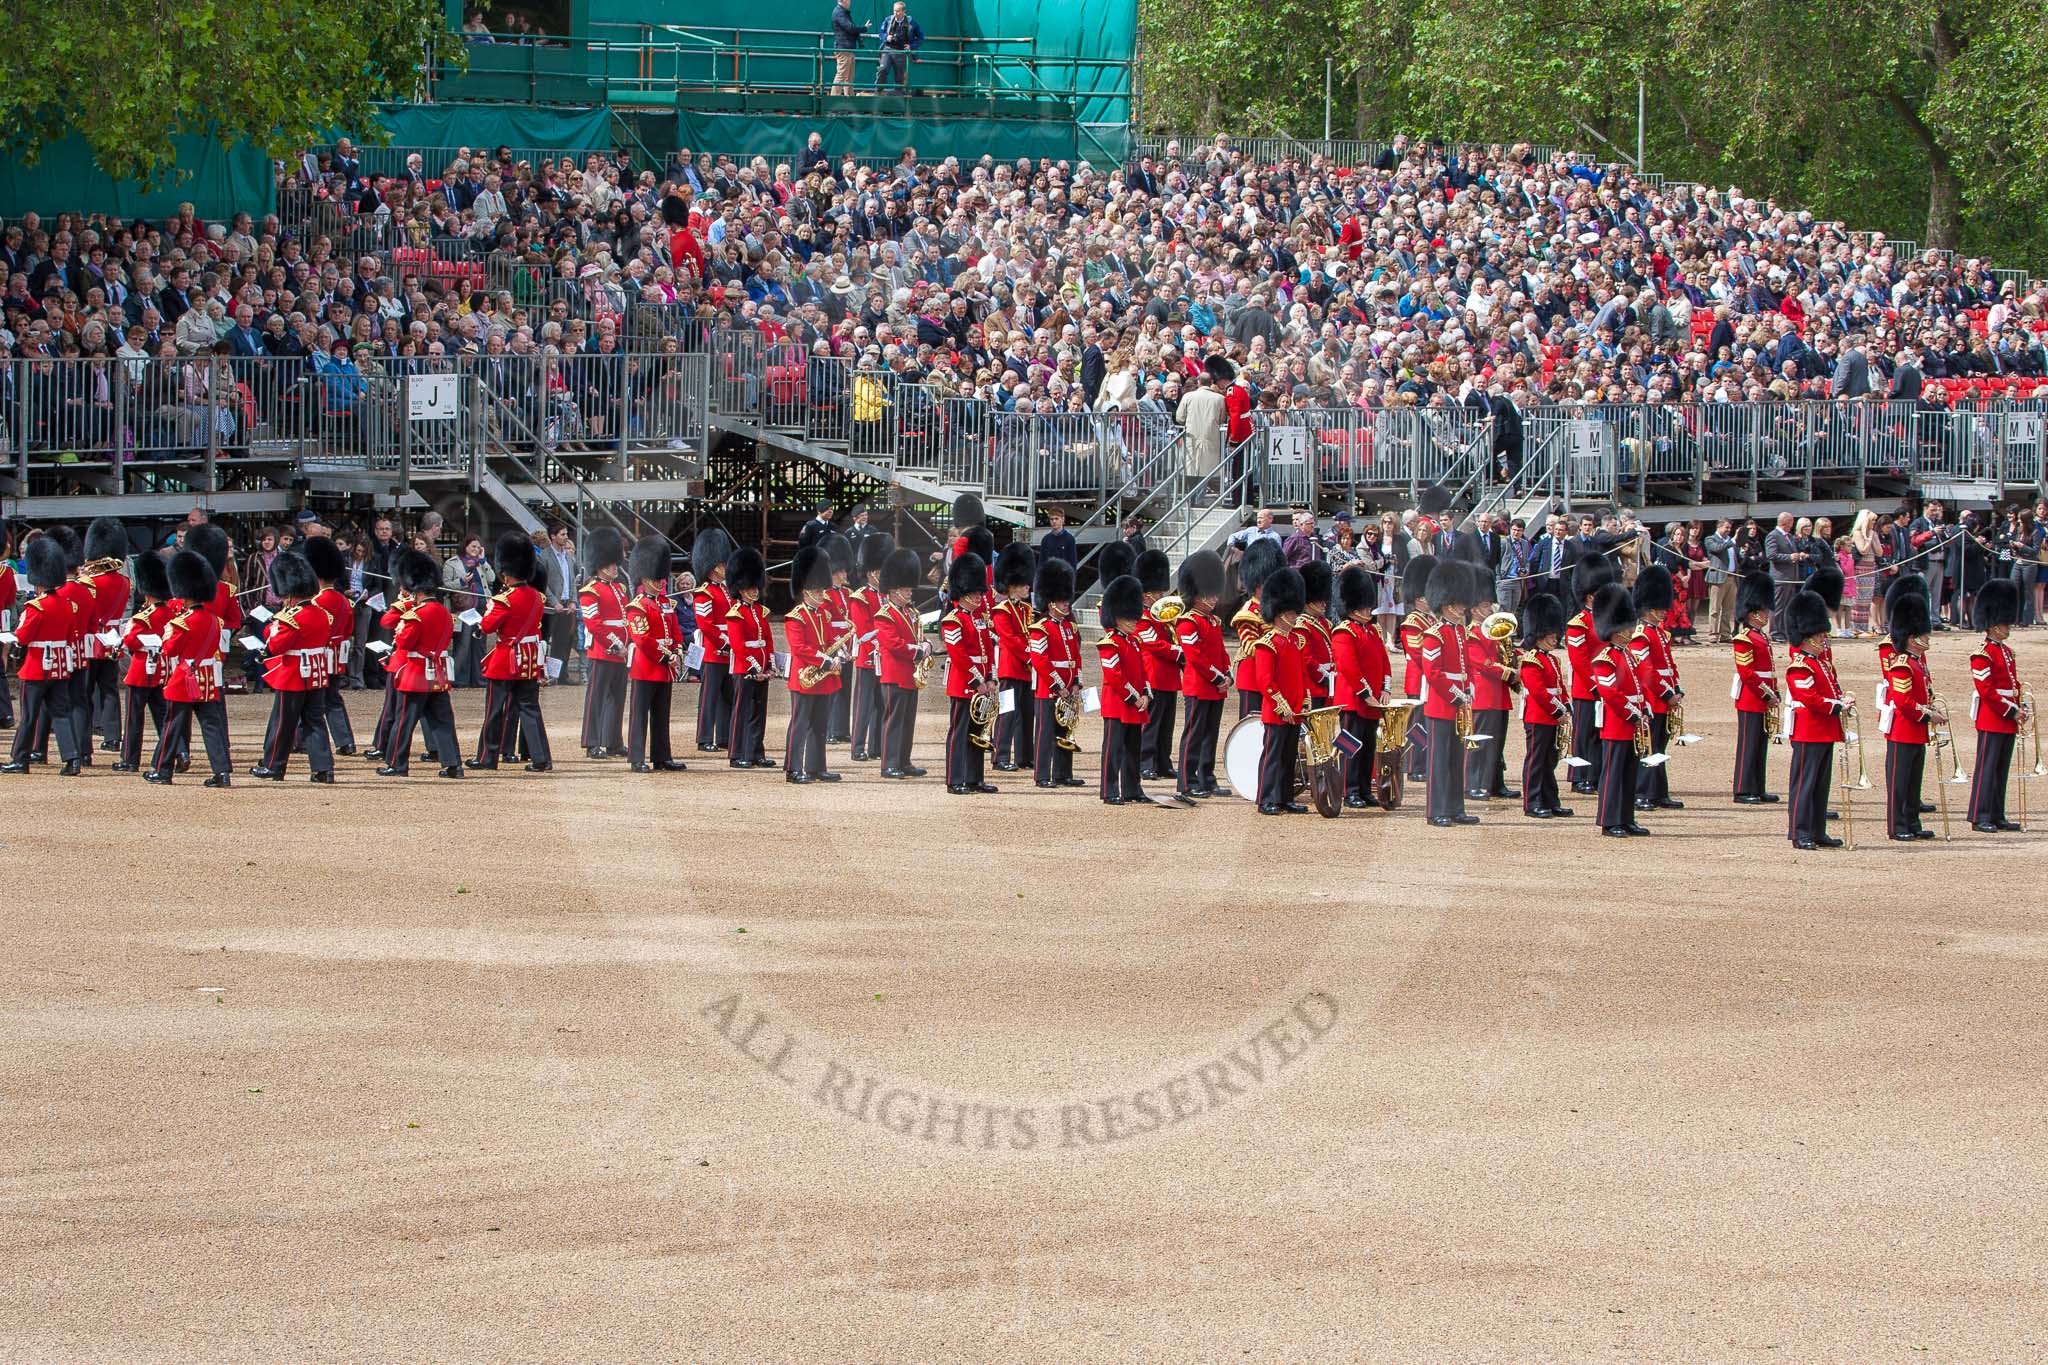 The Colonel's Review 2012: The Band of the Welsh Guards, which arrived first, is already in position, the Band of the Scots Guards is marching into their position..
Horse Guards Parade, Westminster,
London SW1,

United Kingdom,
on 09 June 2012 at 10:17, image #36